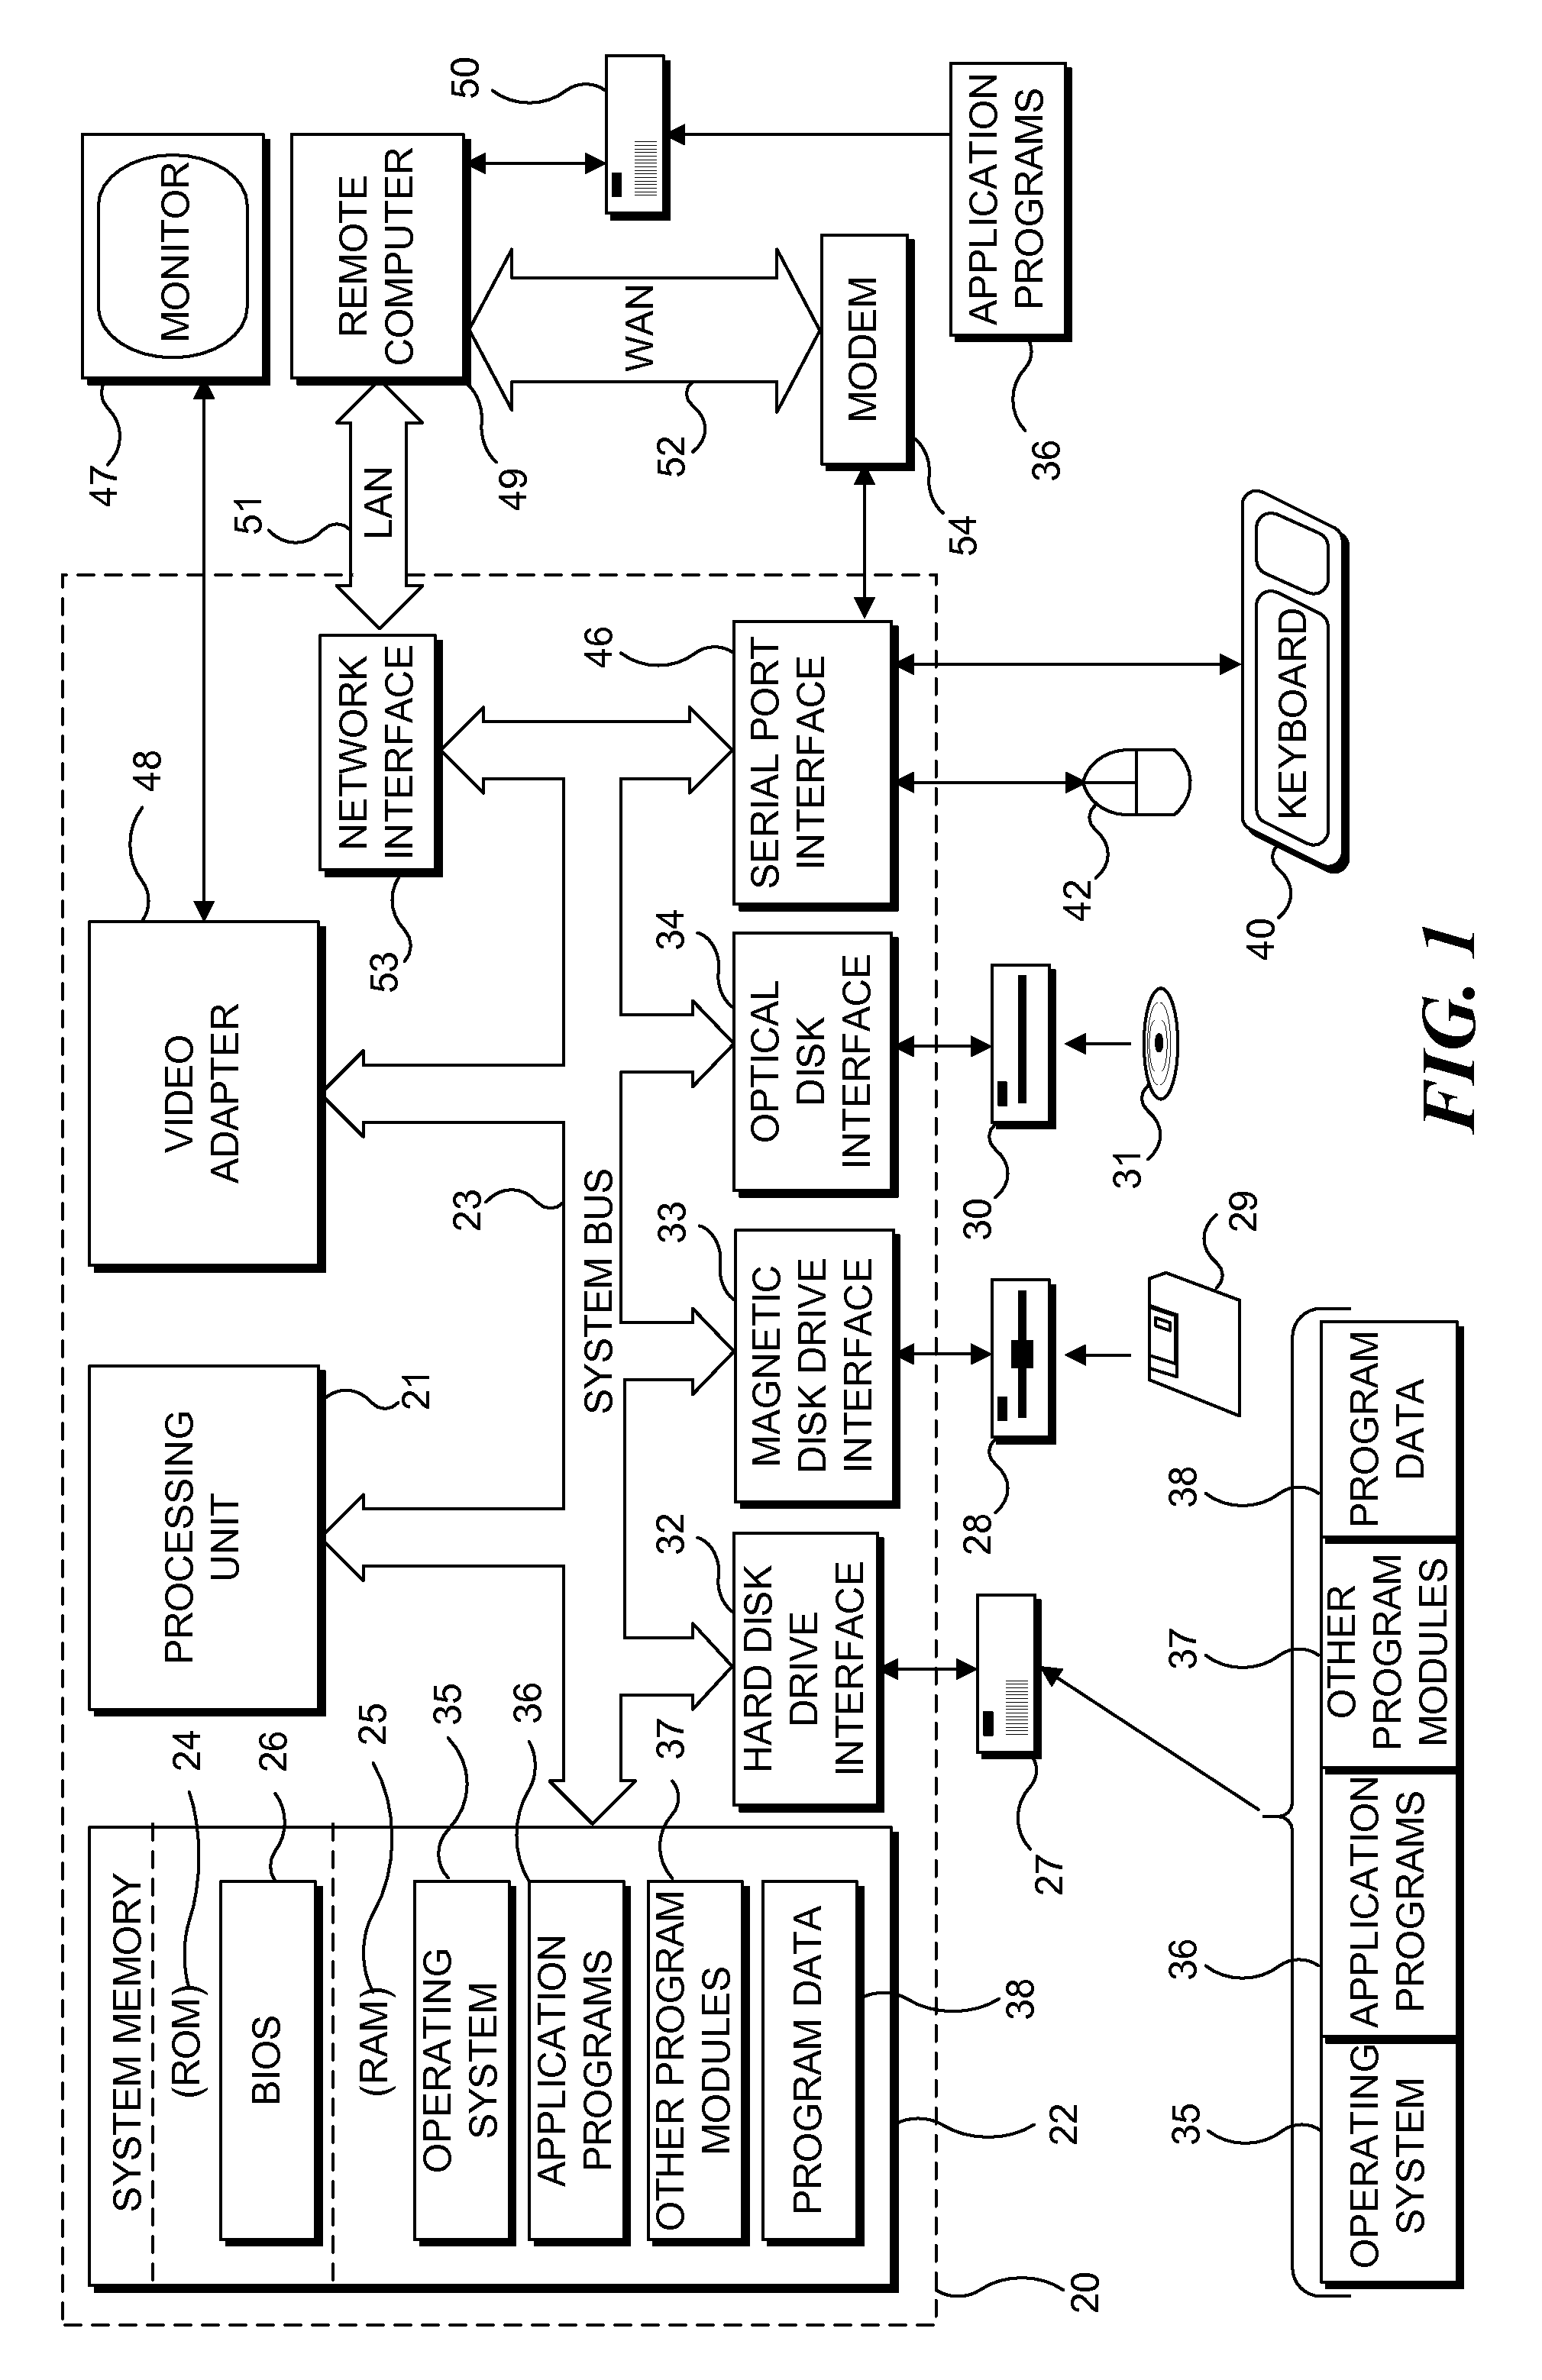 Method for creating an embedded database in a spreadsheet